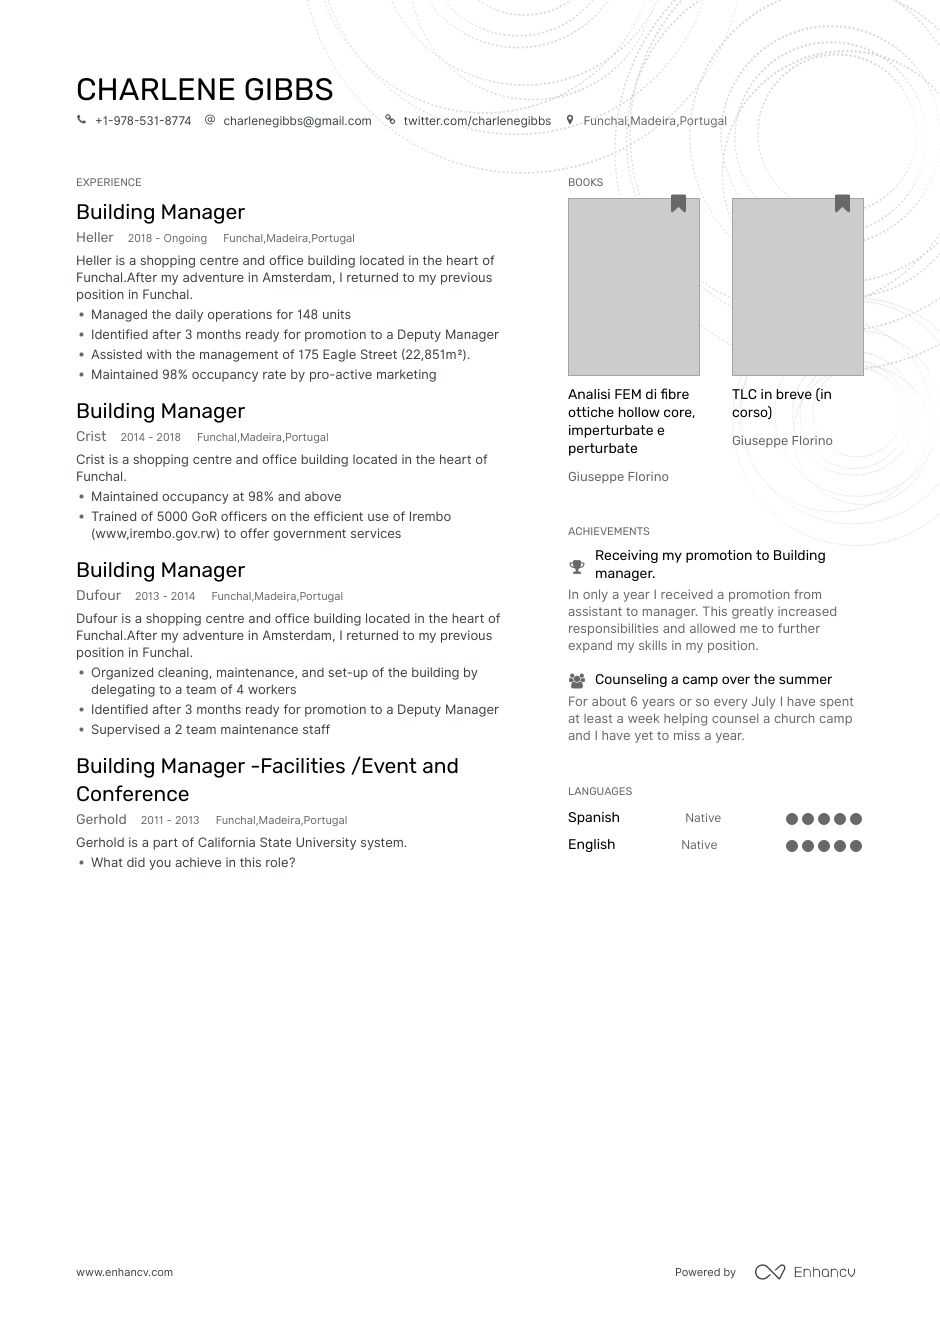 Top Building Manager Resume Examples & Samples for 2020 ...